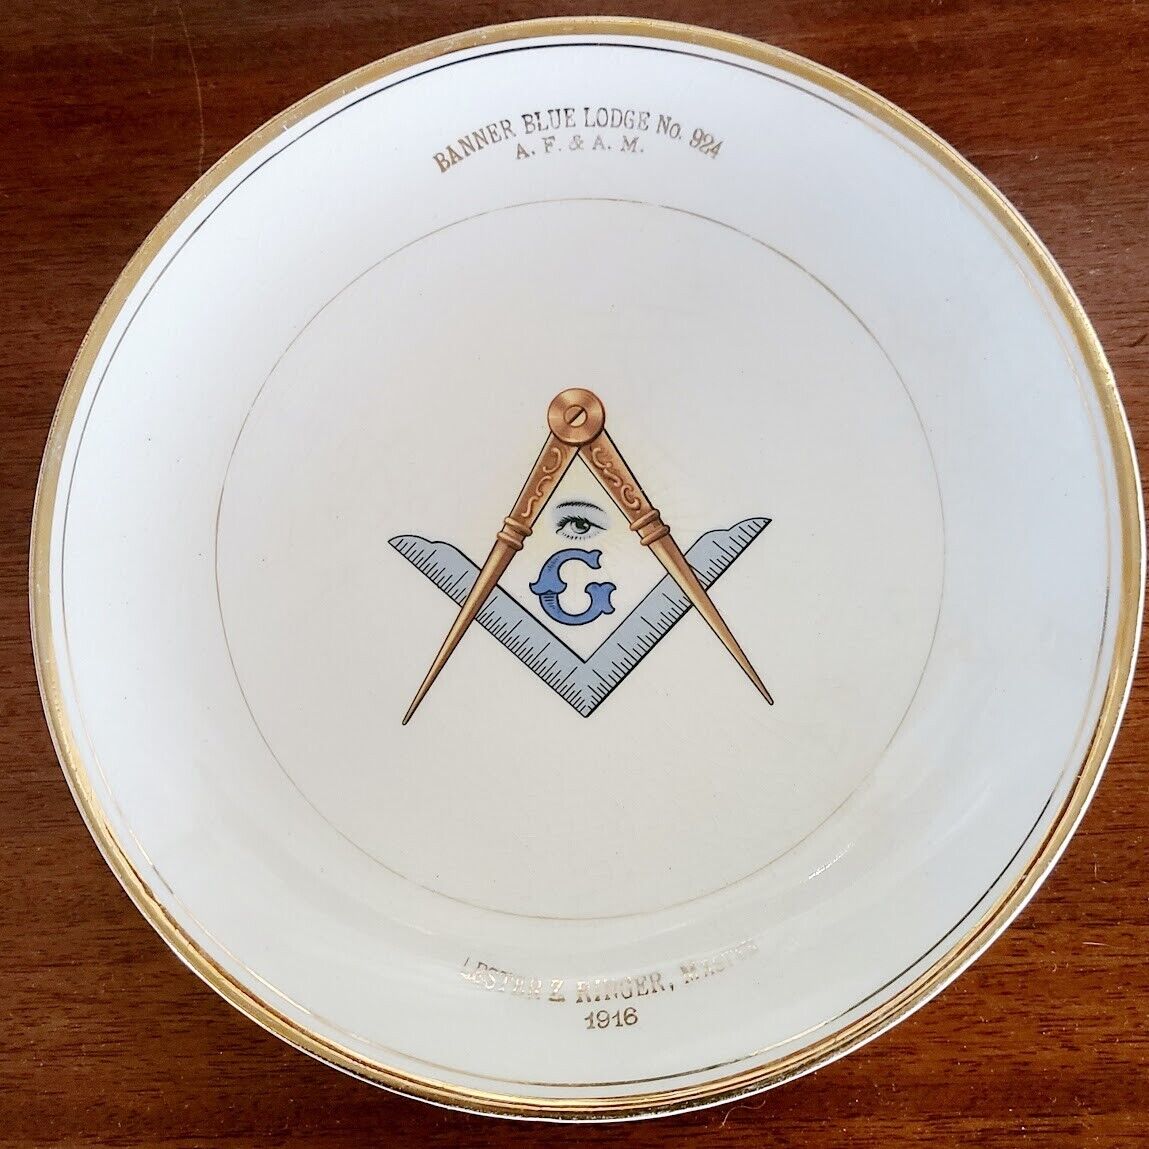 Antique Masonic Banner Blue Lodge No 924 A.F.&A.M. Plate  - Ringer, Master 1916